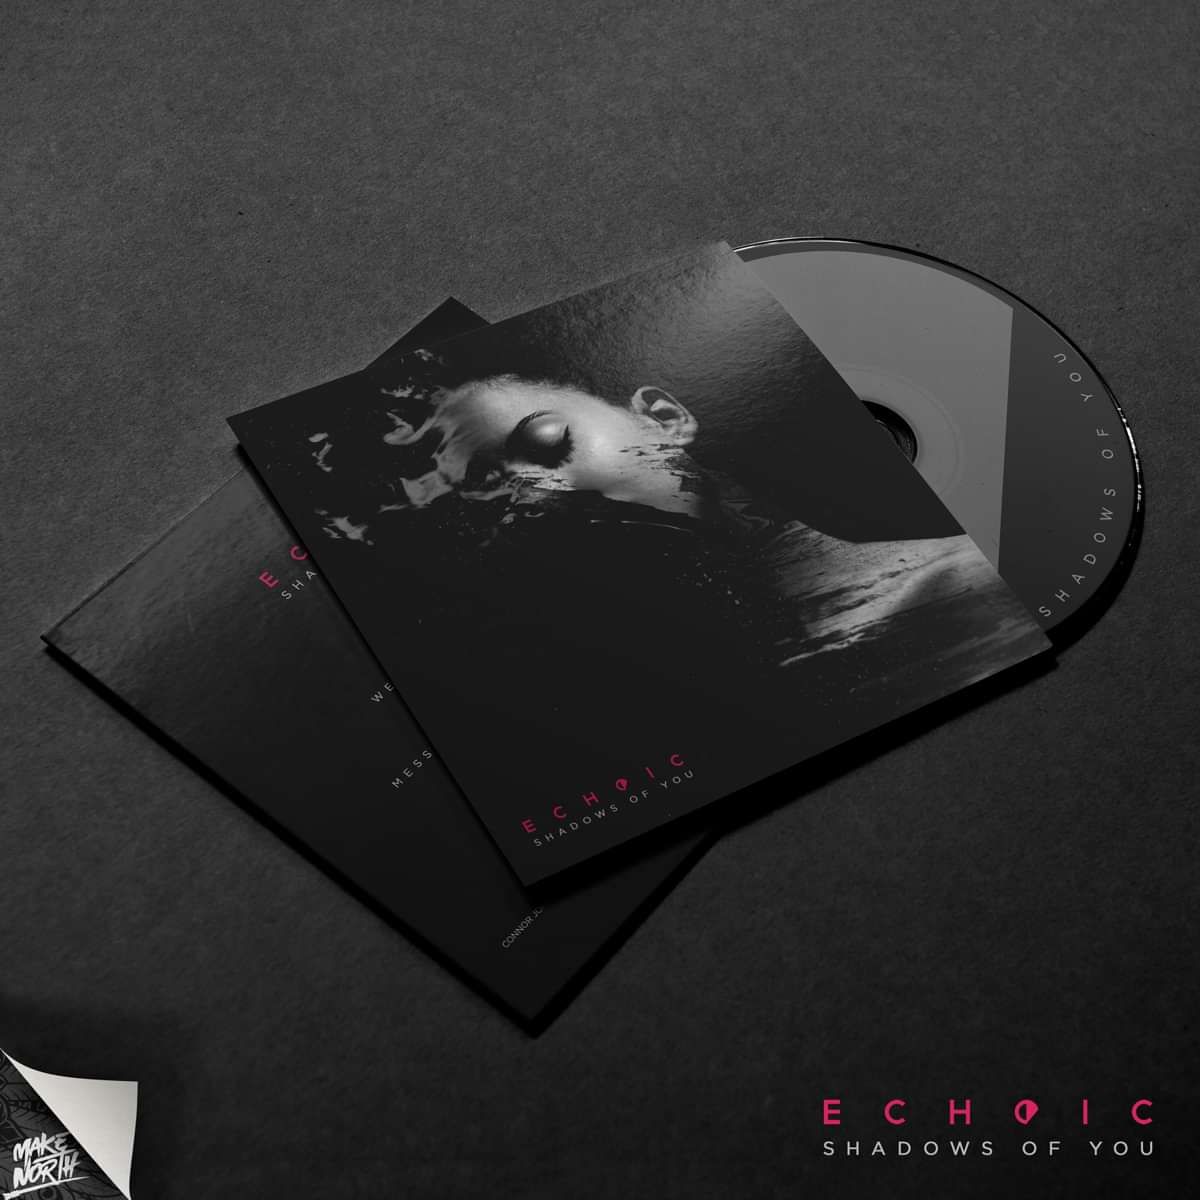 Shadows of You EP (Physical CD) - Echoic